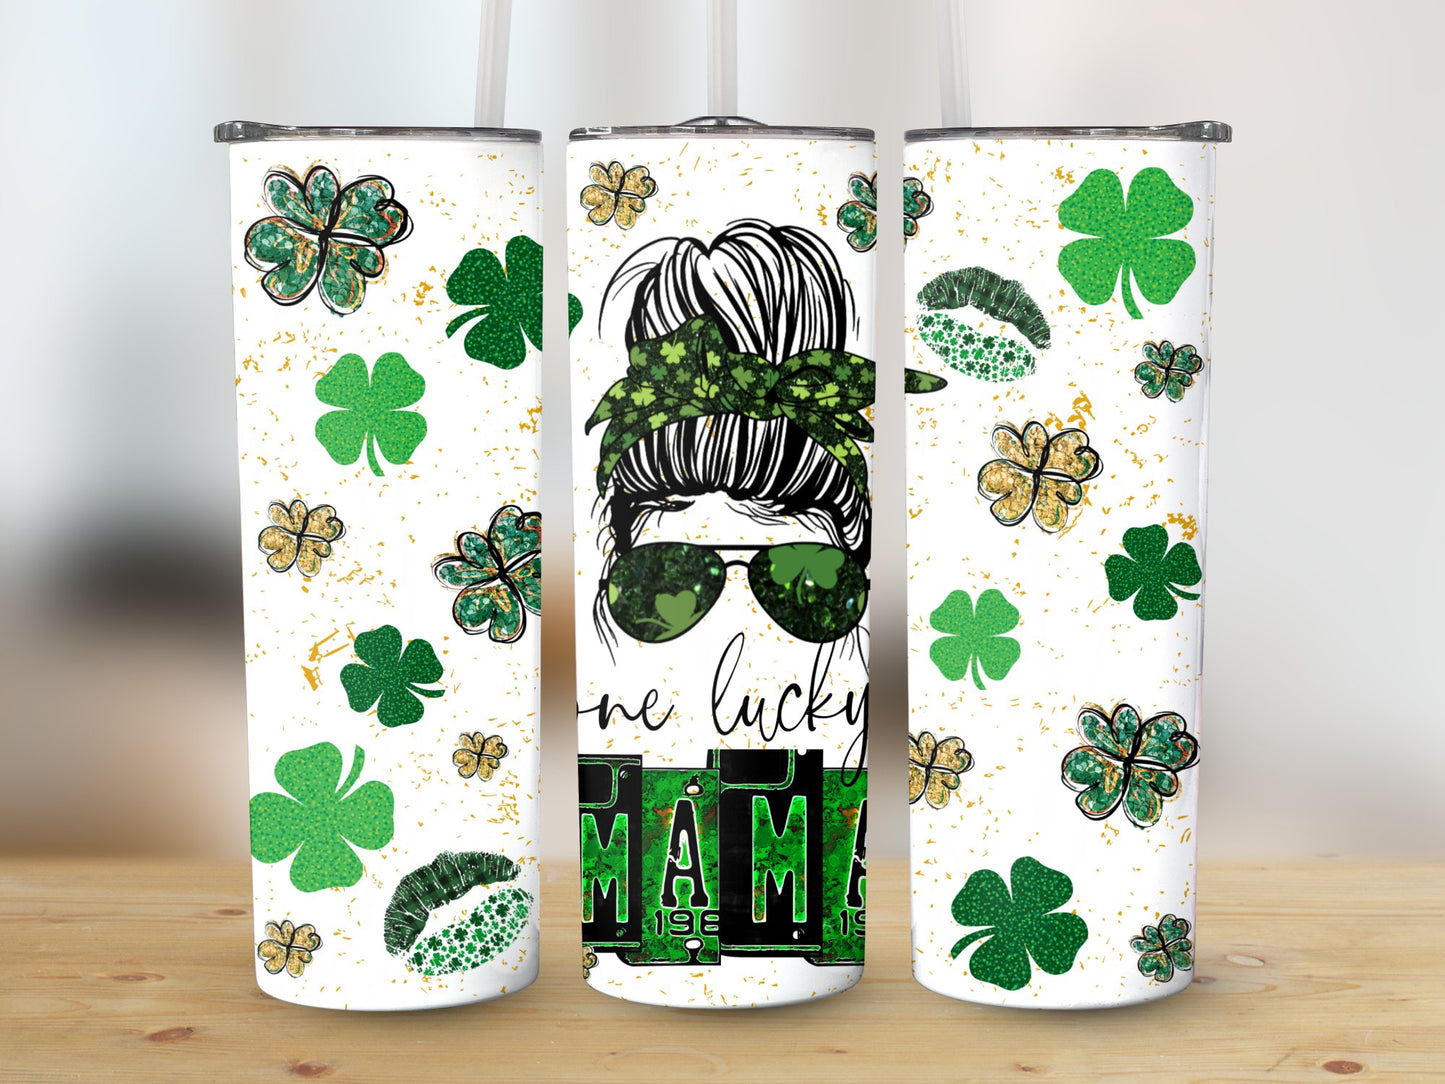 One Lucky Mama (St. Patrick's Tumbler)